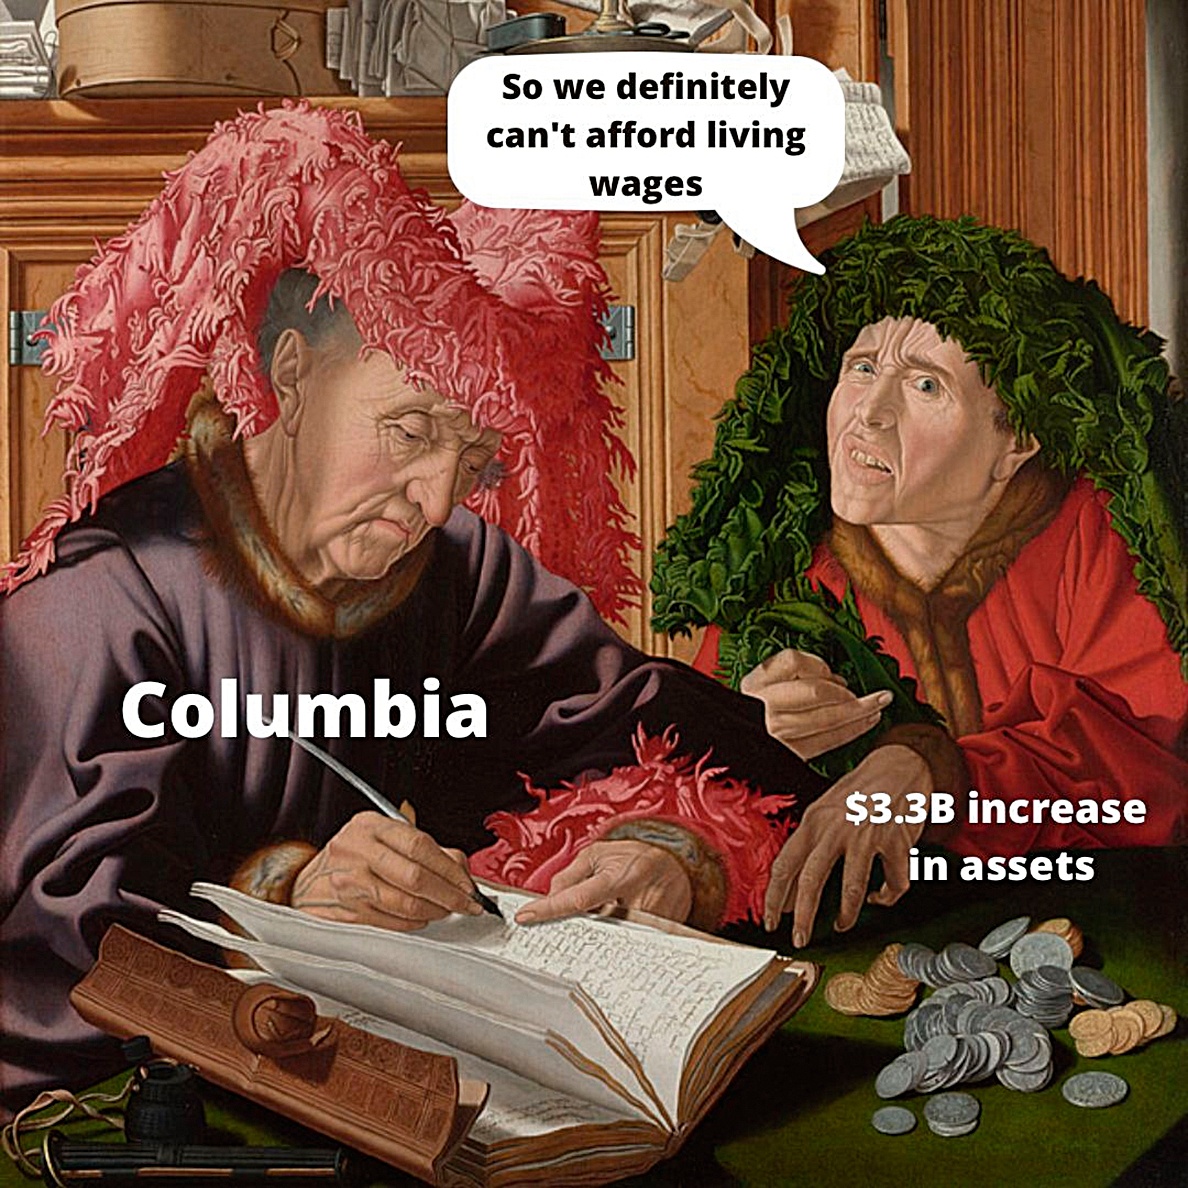 Meme von / by Student Workers of Columbia, 2021